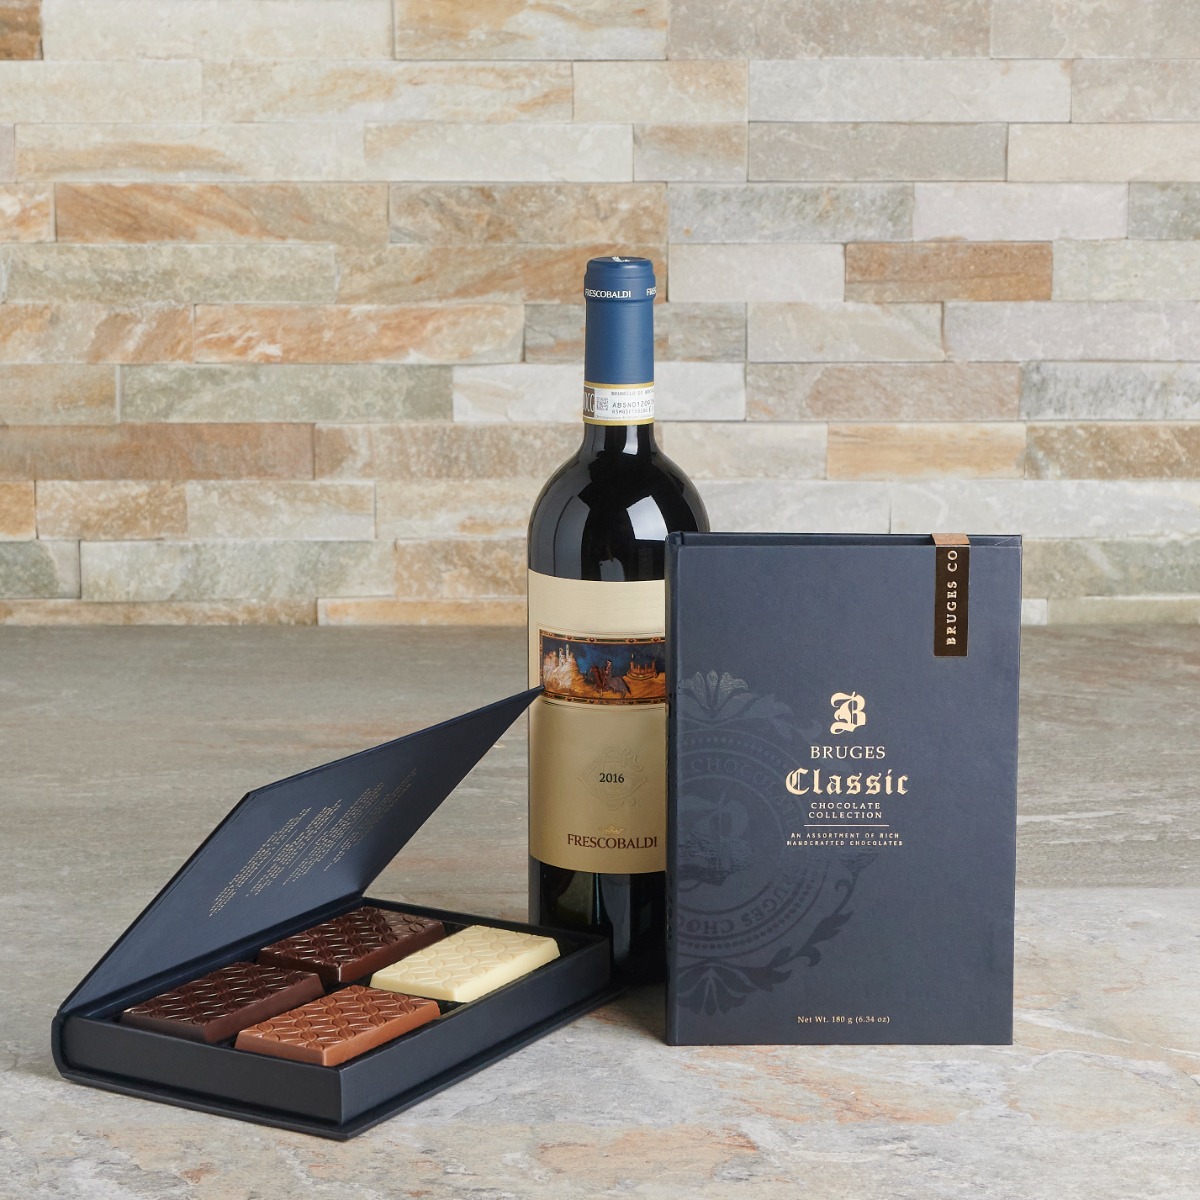 Chocolate is Love Wine Gift Set - wine gift baskets - US delivery